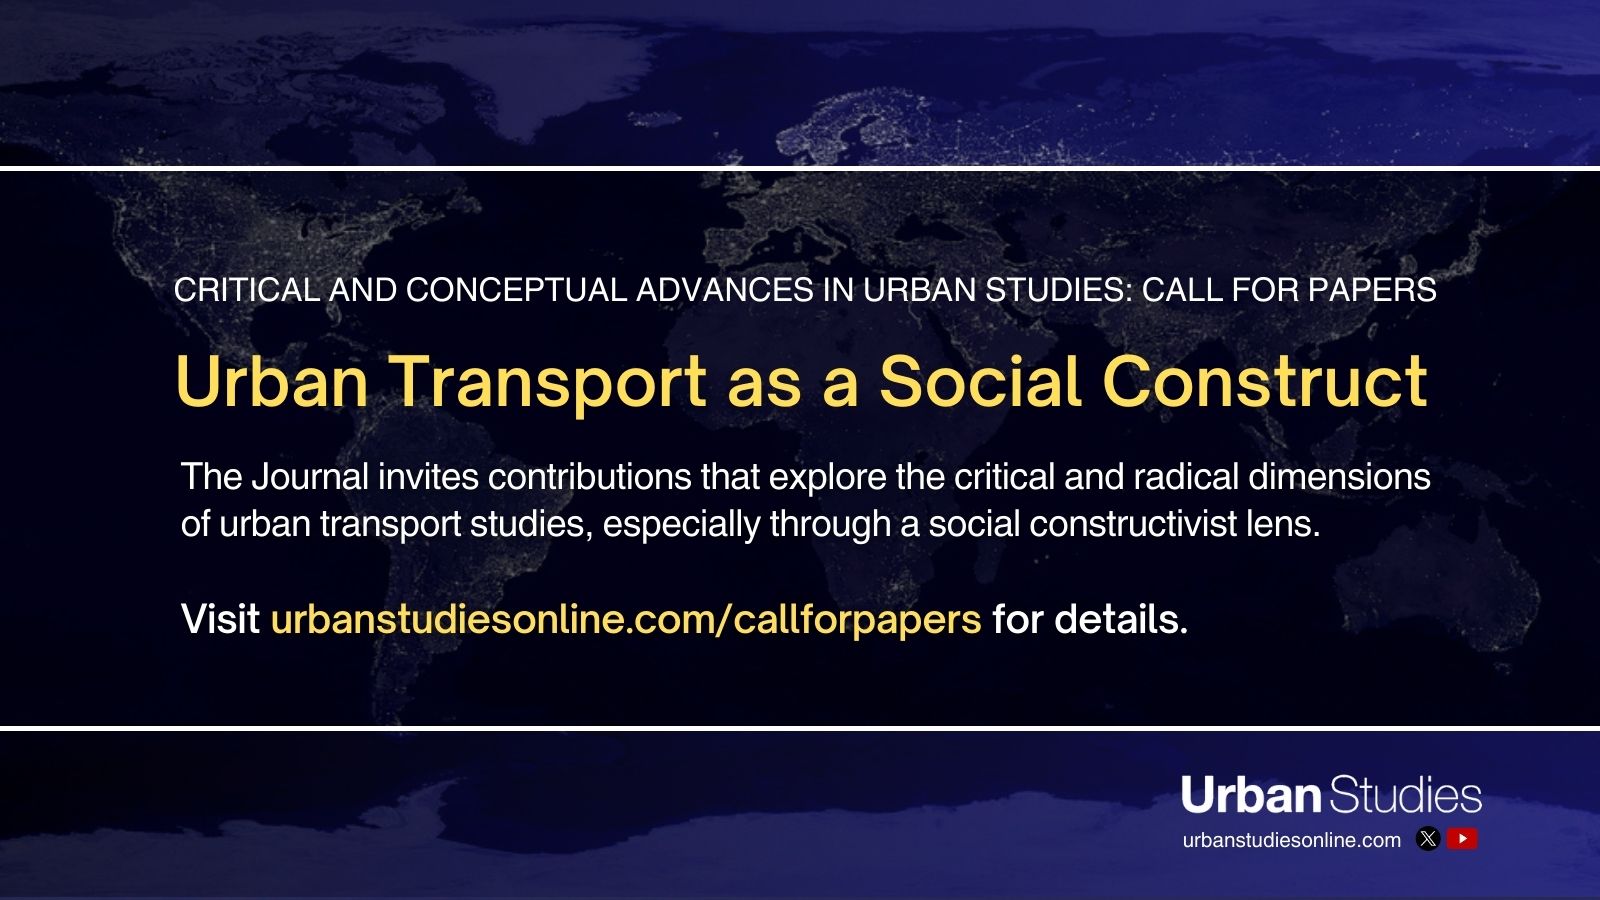 Call for Papers advert: Critical and Conceptual Advances in Urban Studies